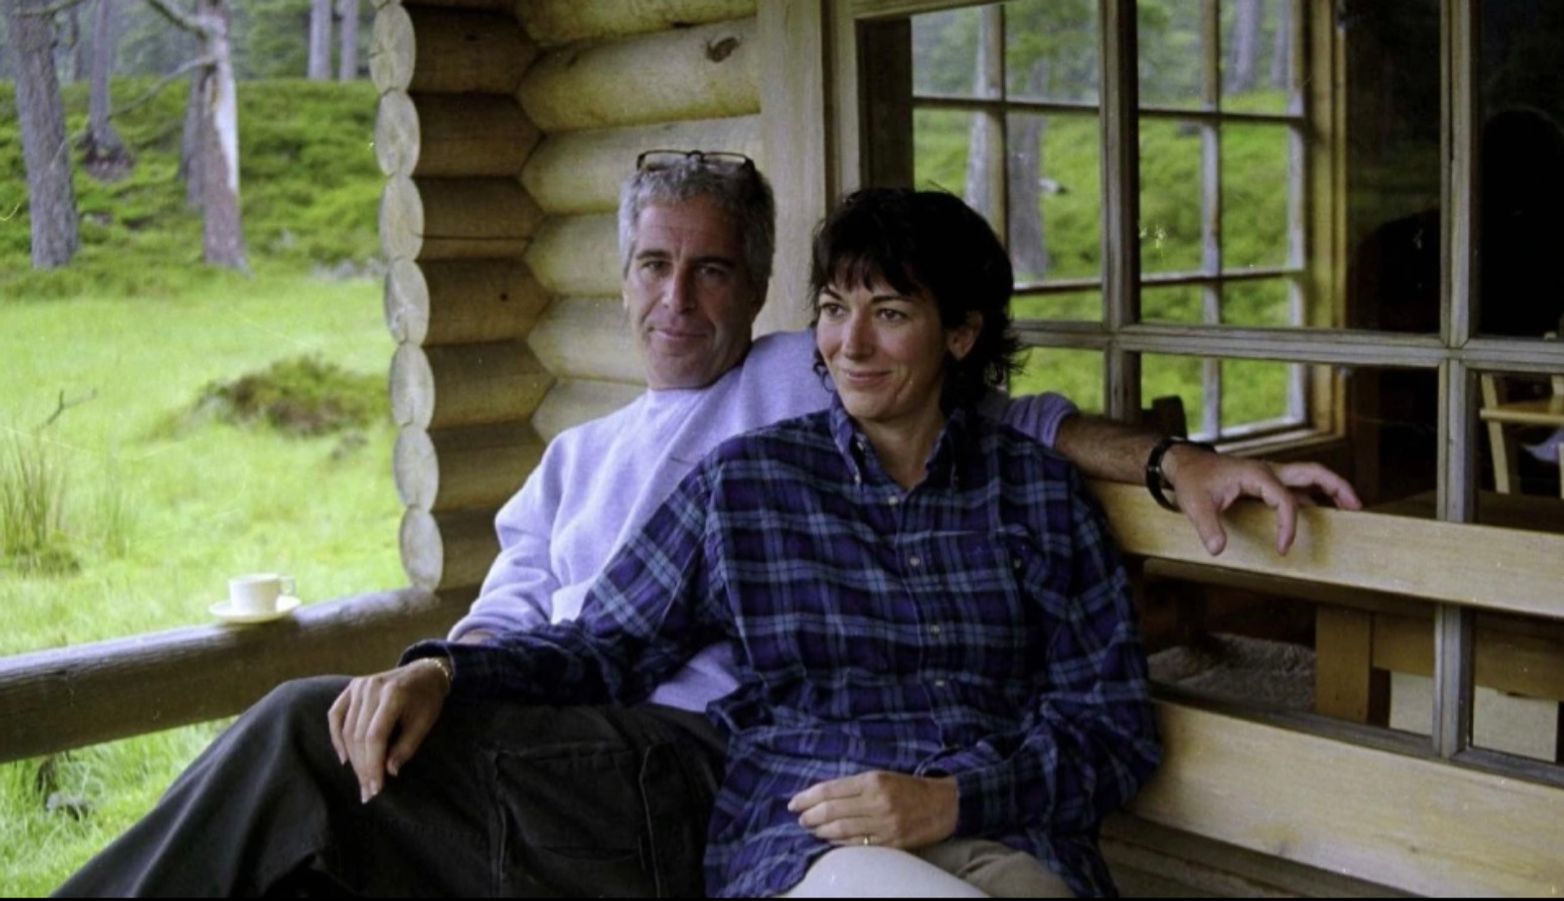 Ghislaine Maxwell and Jeffrey Epstein lounging in the Queen's log cabin at Balmoral.